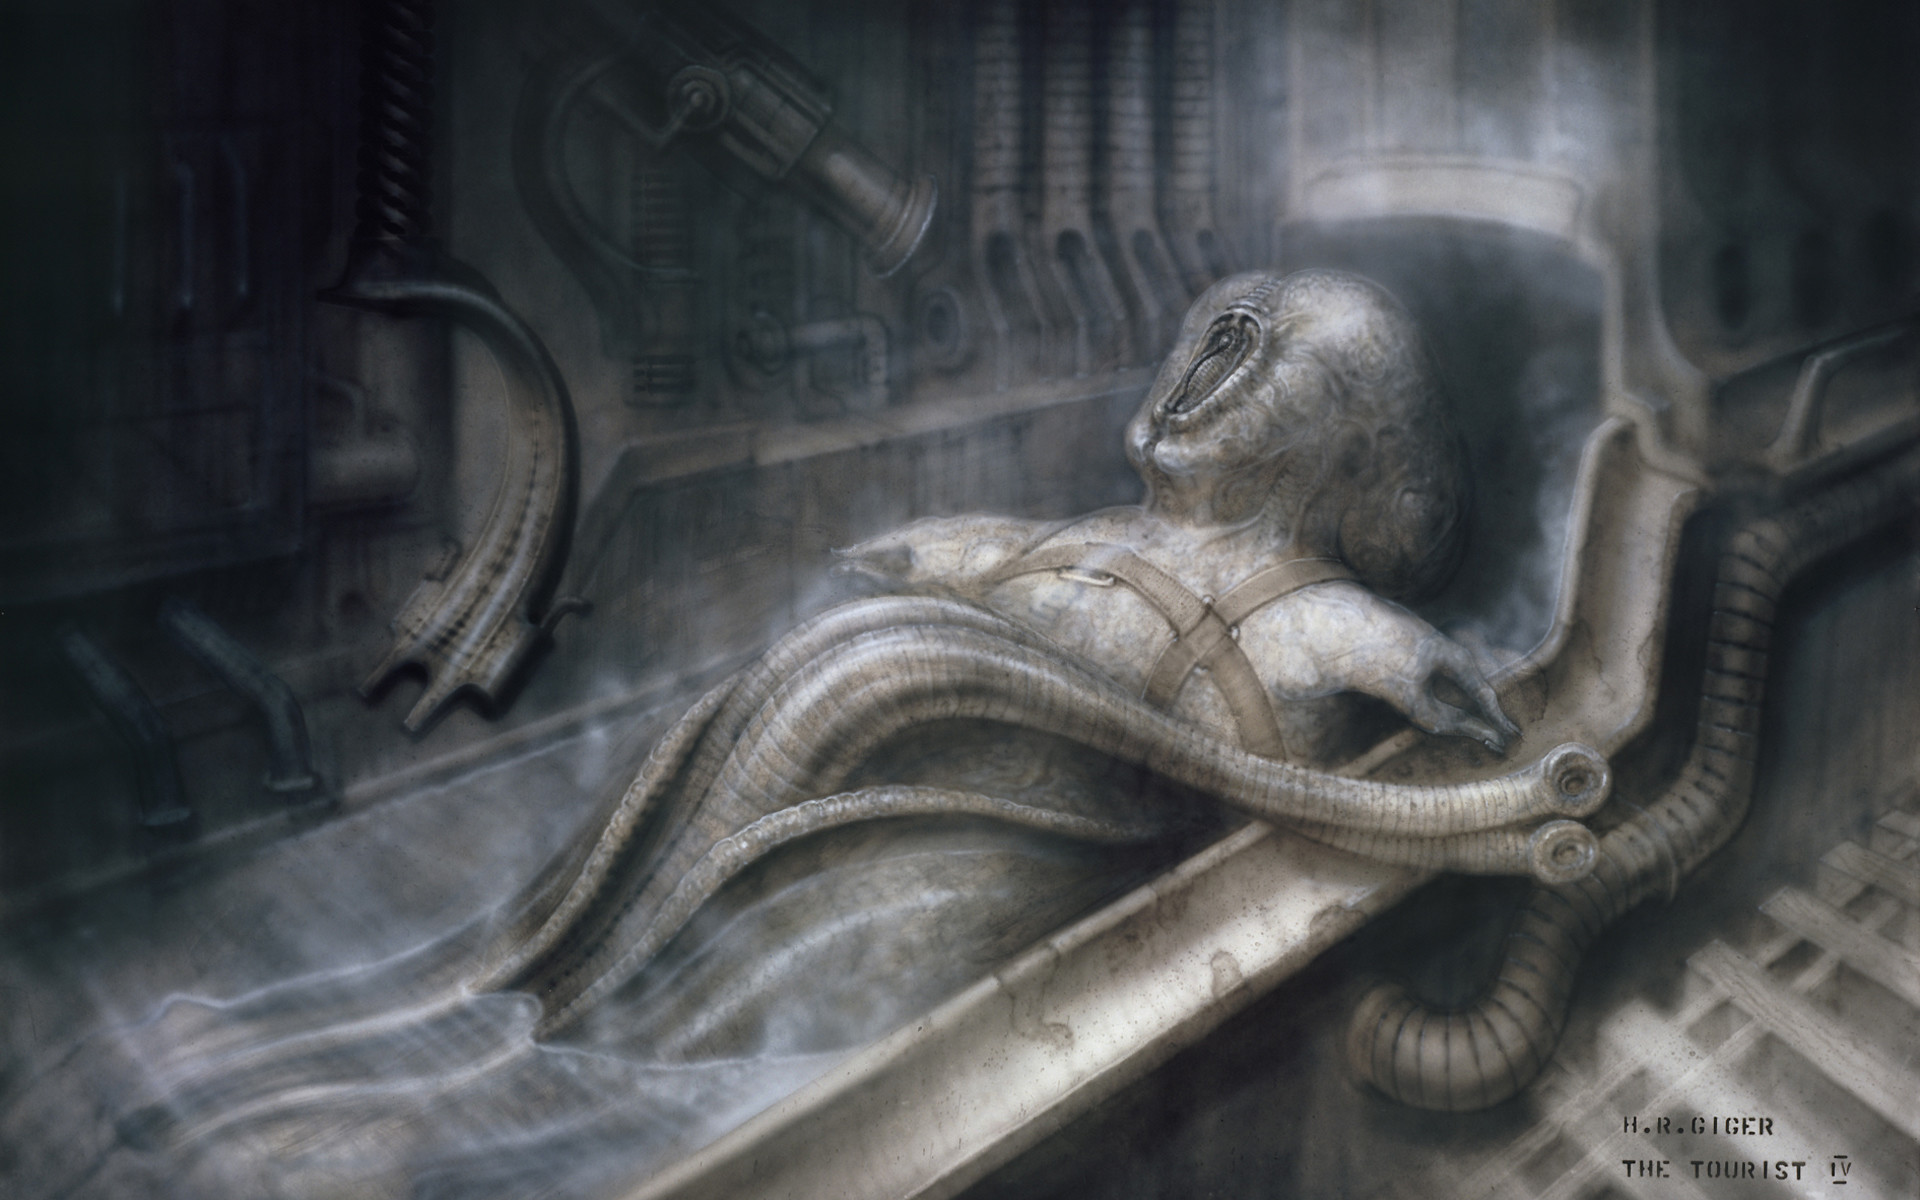 Hans Rdi Giger The Tourist IV The creature with the tentacle